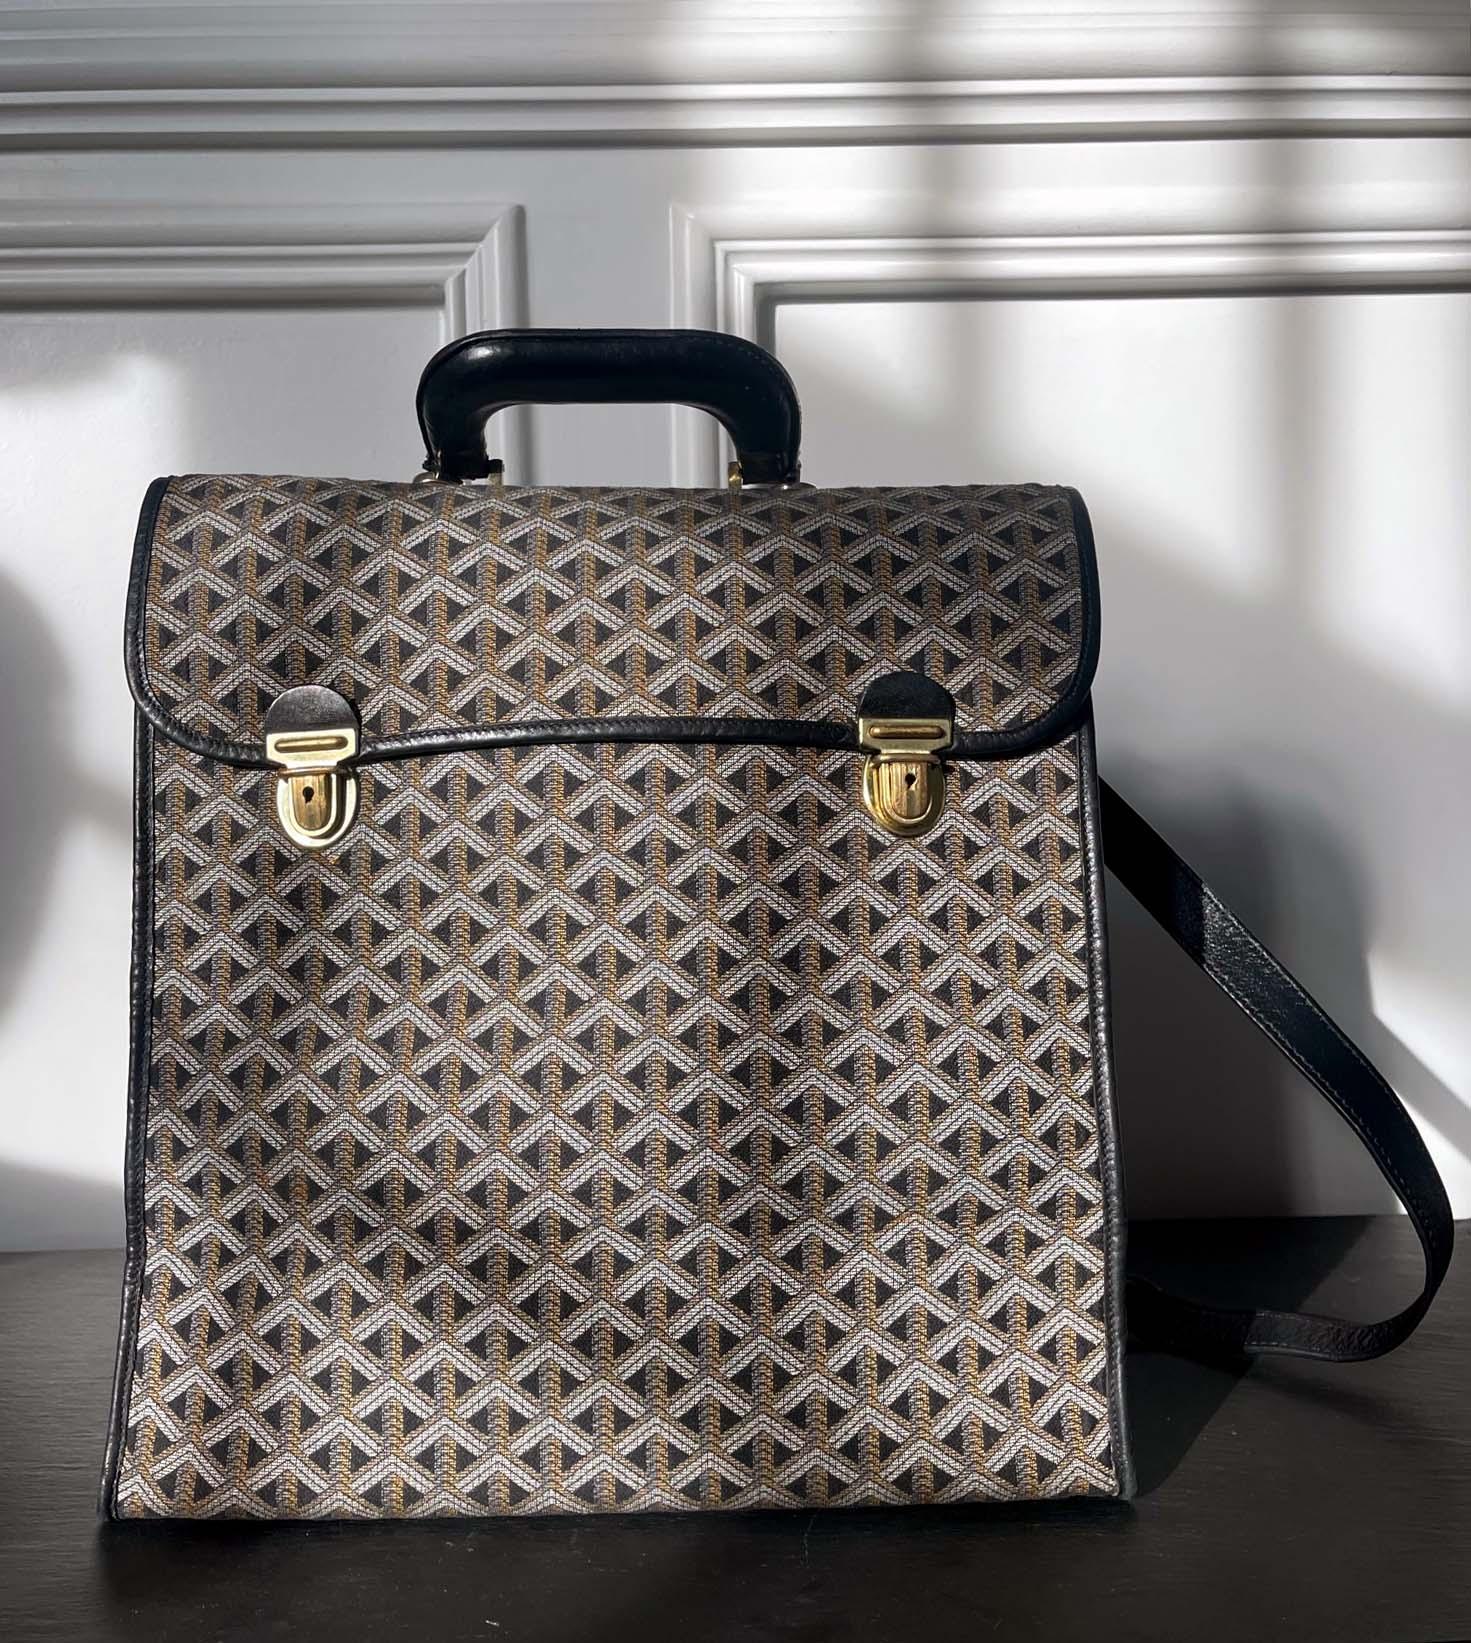 A vintage crossbody type Goyard bag with its iconic chevron printed canvas, leather trims and brass hardware circa post 1965 when the flexible canvas was introduced, likely from 1970-80s. The bag has a streamer rectangular shape, but it is